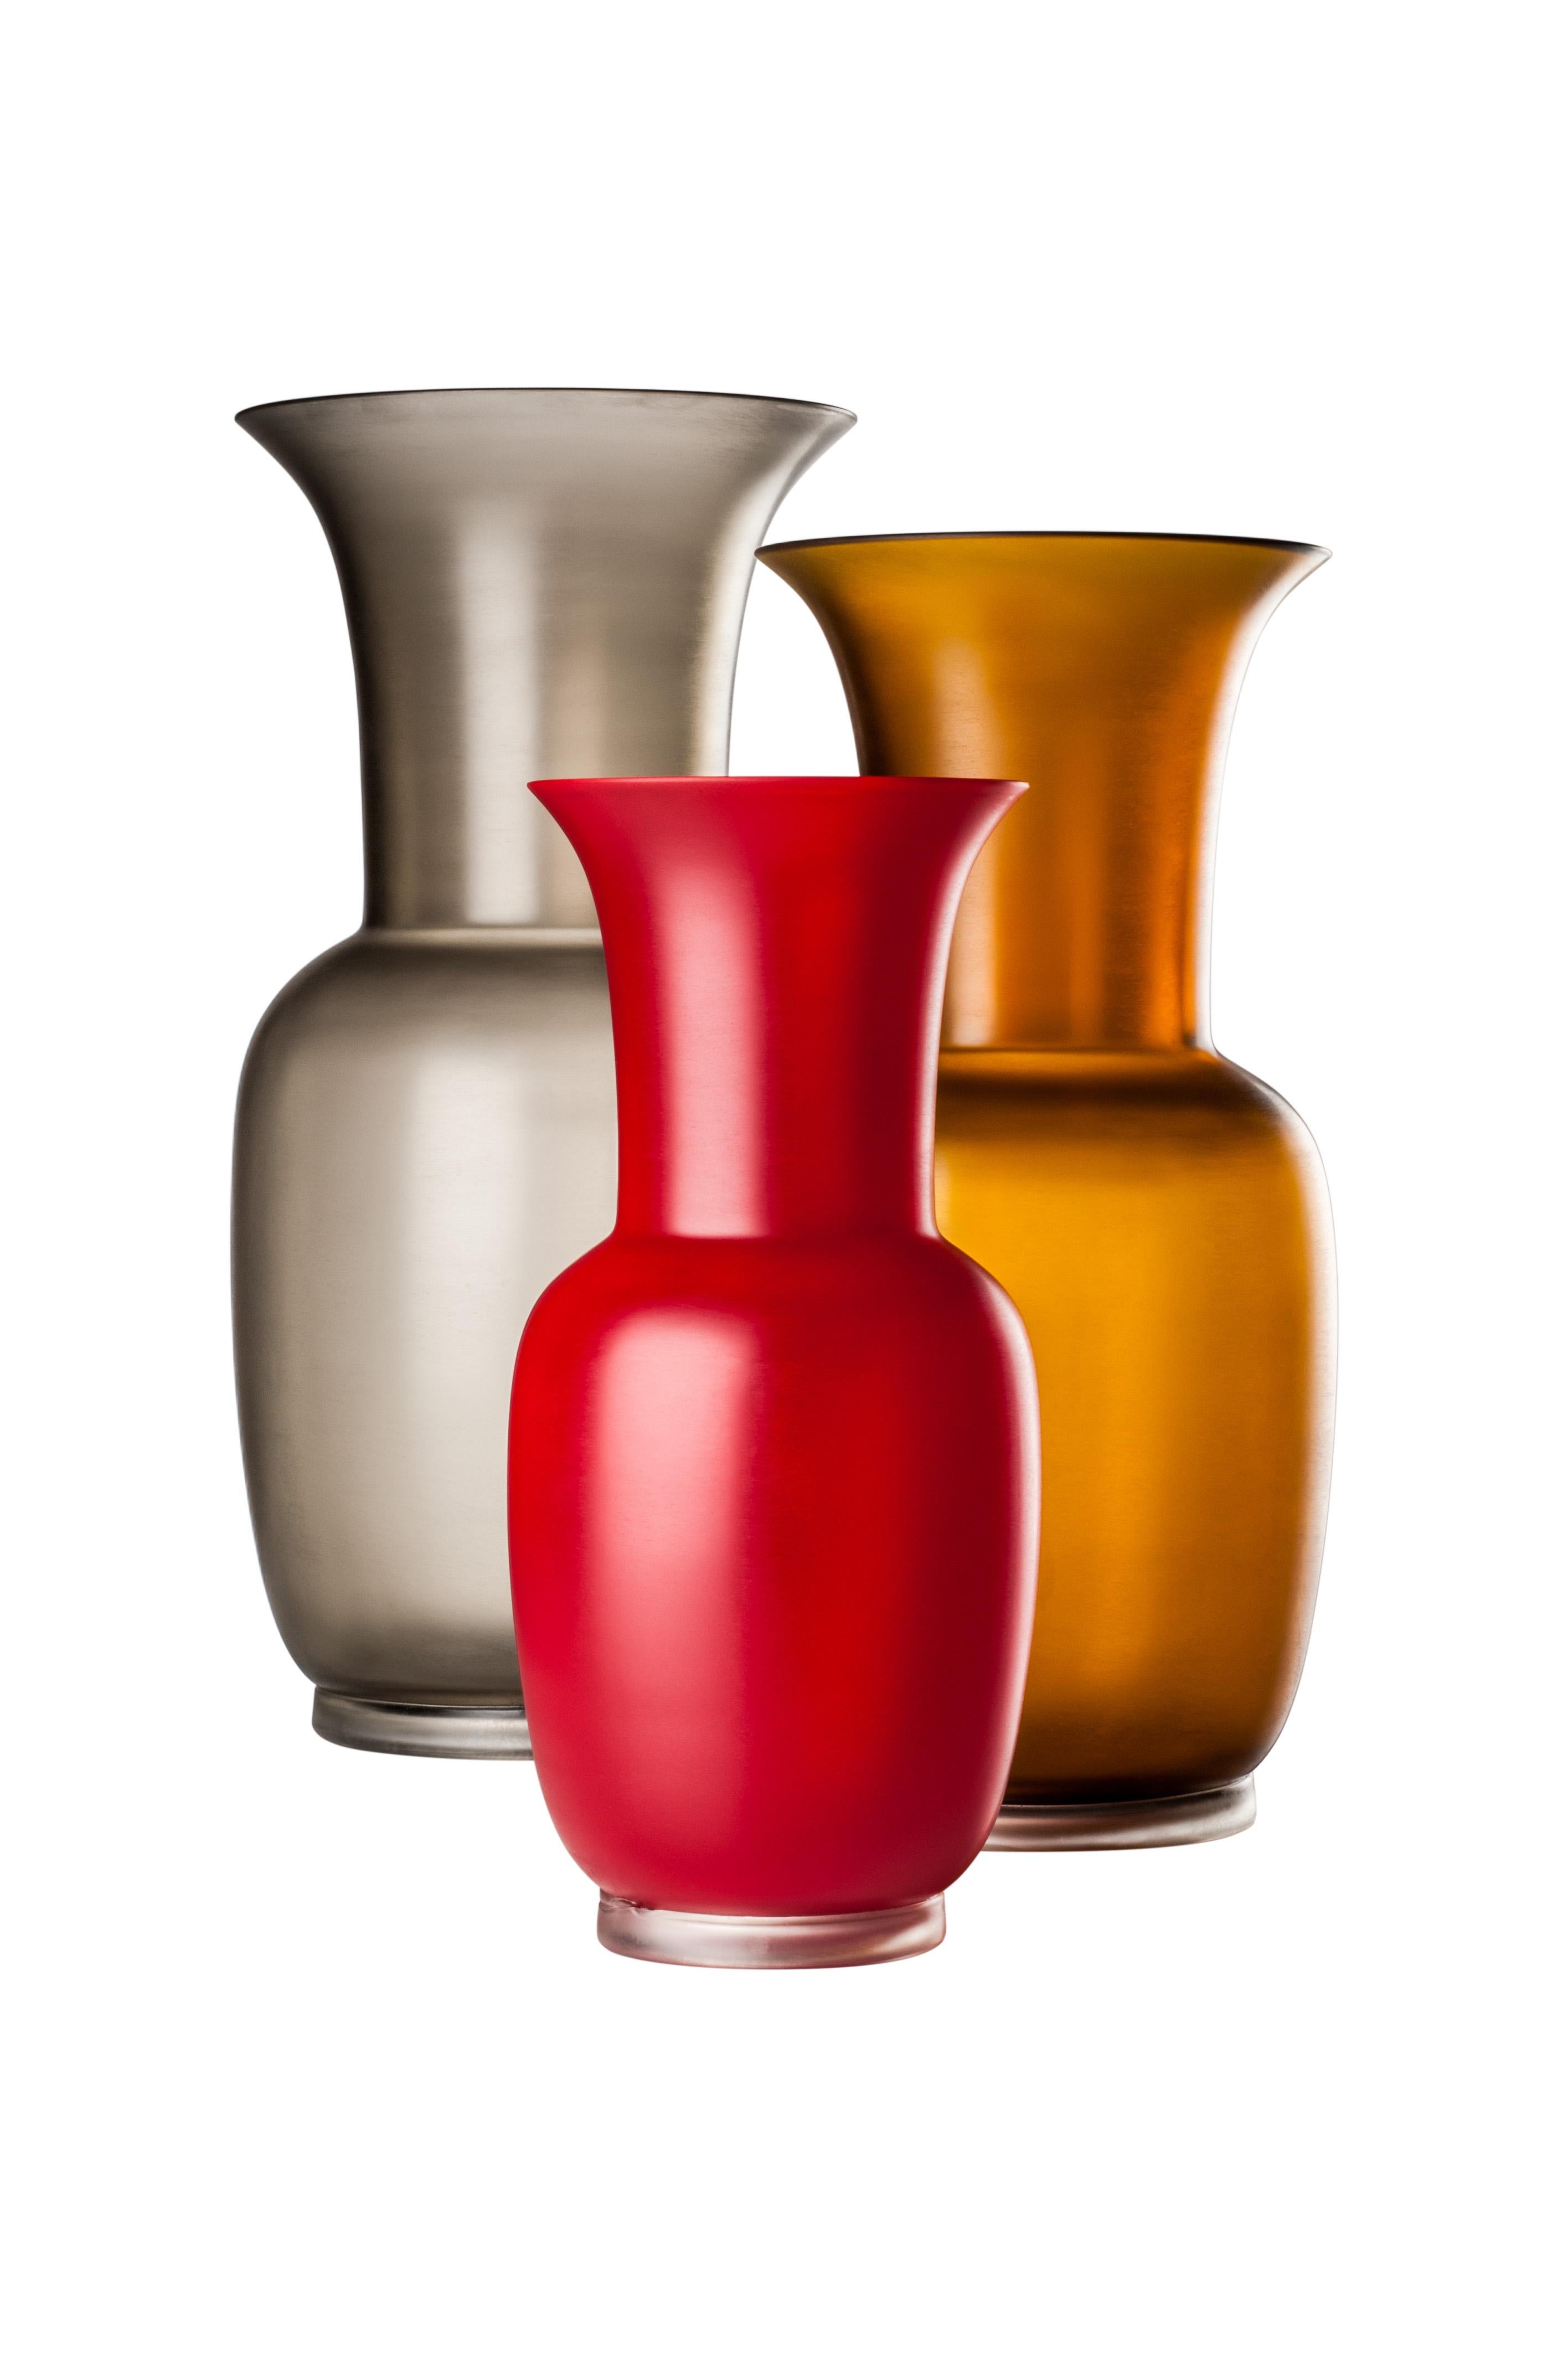 Satin glass vase, designed and manufactured by Venini, features the same shape of the iconic opalino vase with a frosted finish.
Indoor use only.

Dimensions: Ø 17 cm, H 36 cm.
    